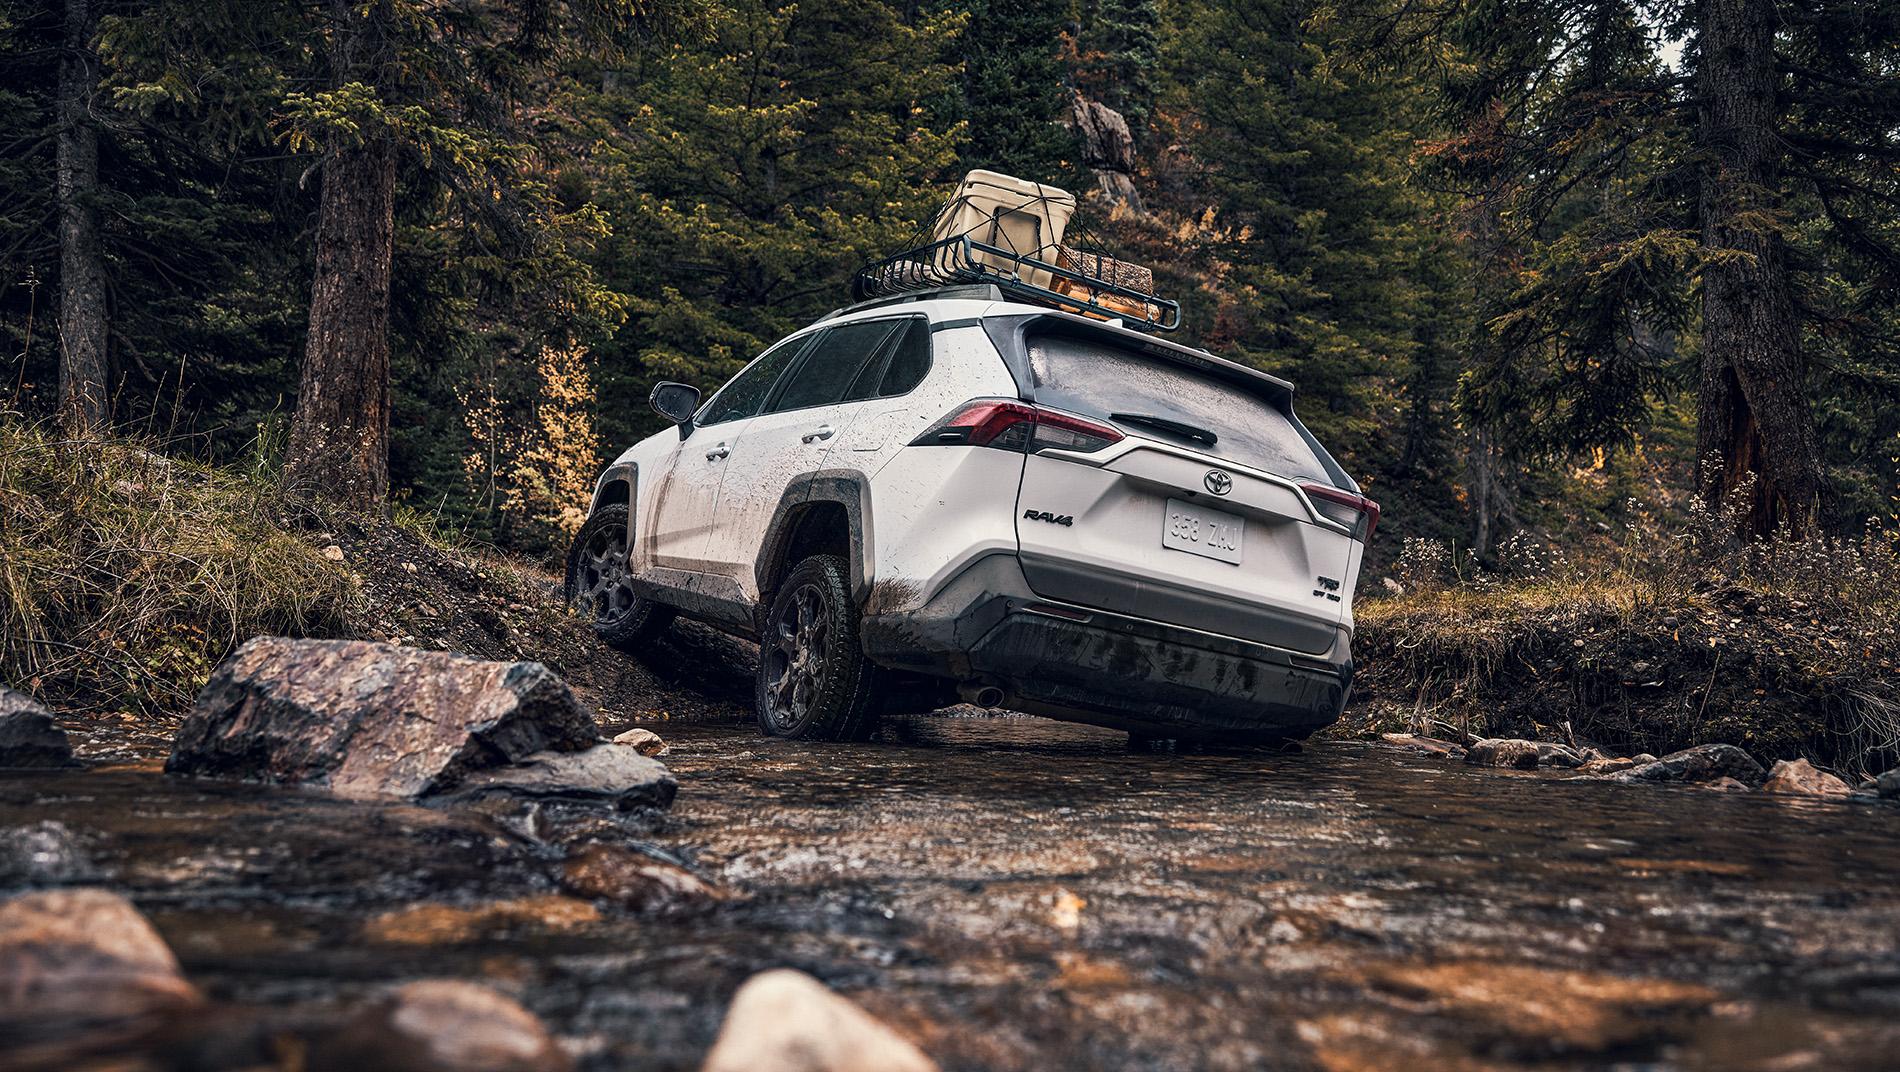 Toyota RAV4 with cargo rack on roof driving through a mountain stream